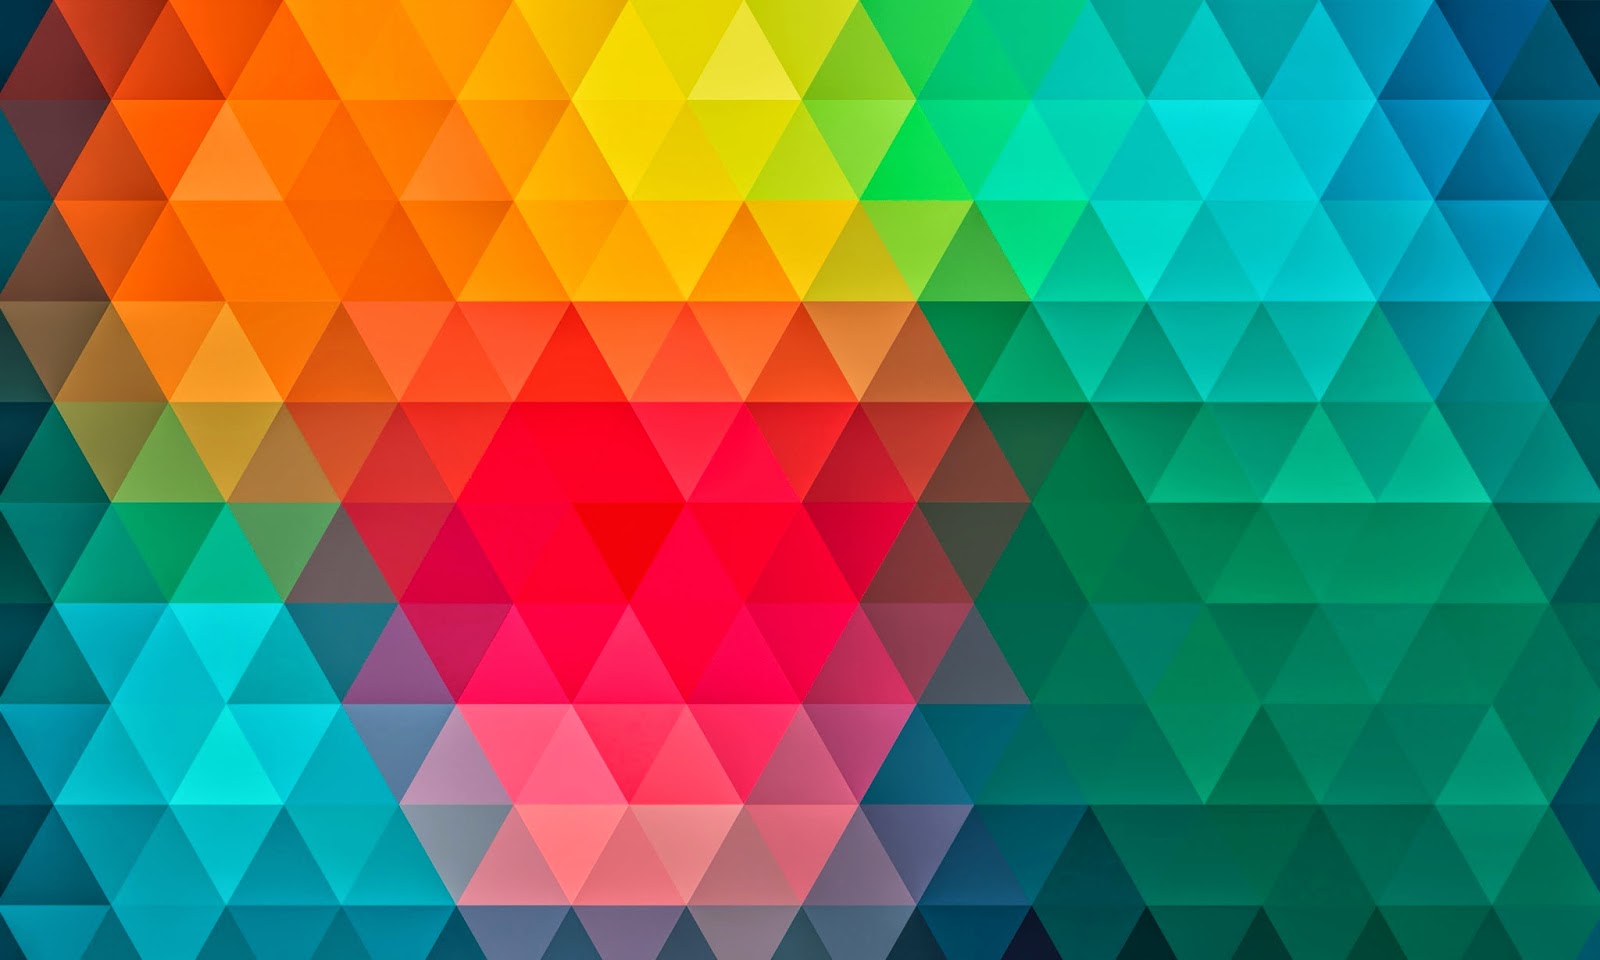 Abstract Triangles Wallpapers Hd Wallpapers High HD Wallpapers Download Free Map Images Wallpaper [wallpaper376.blogspot.com]